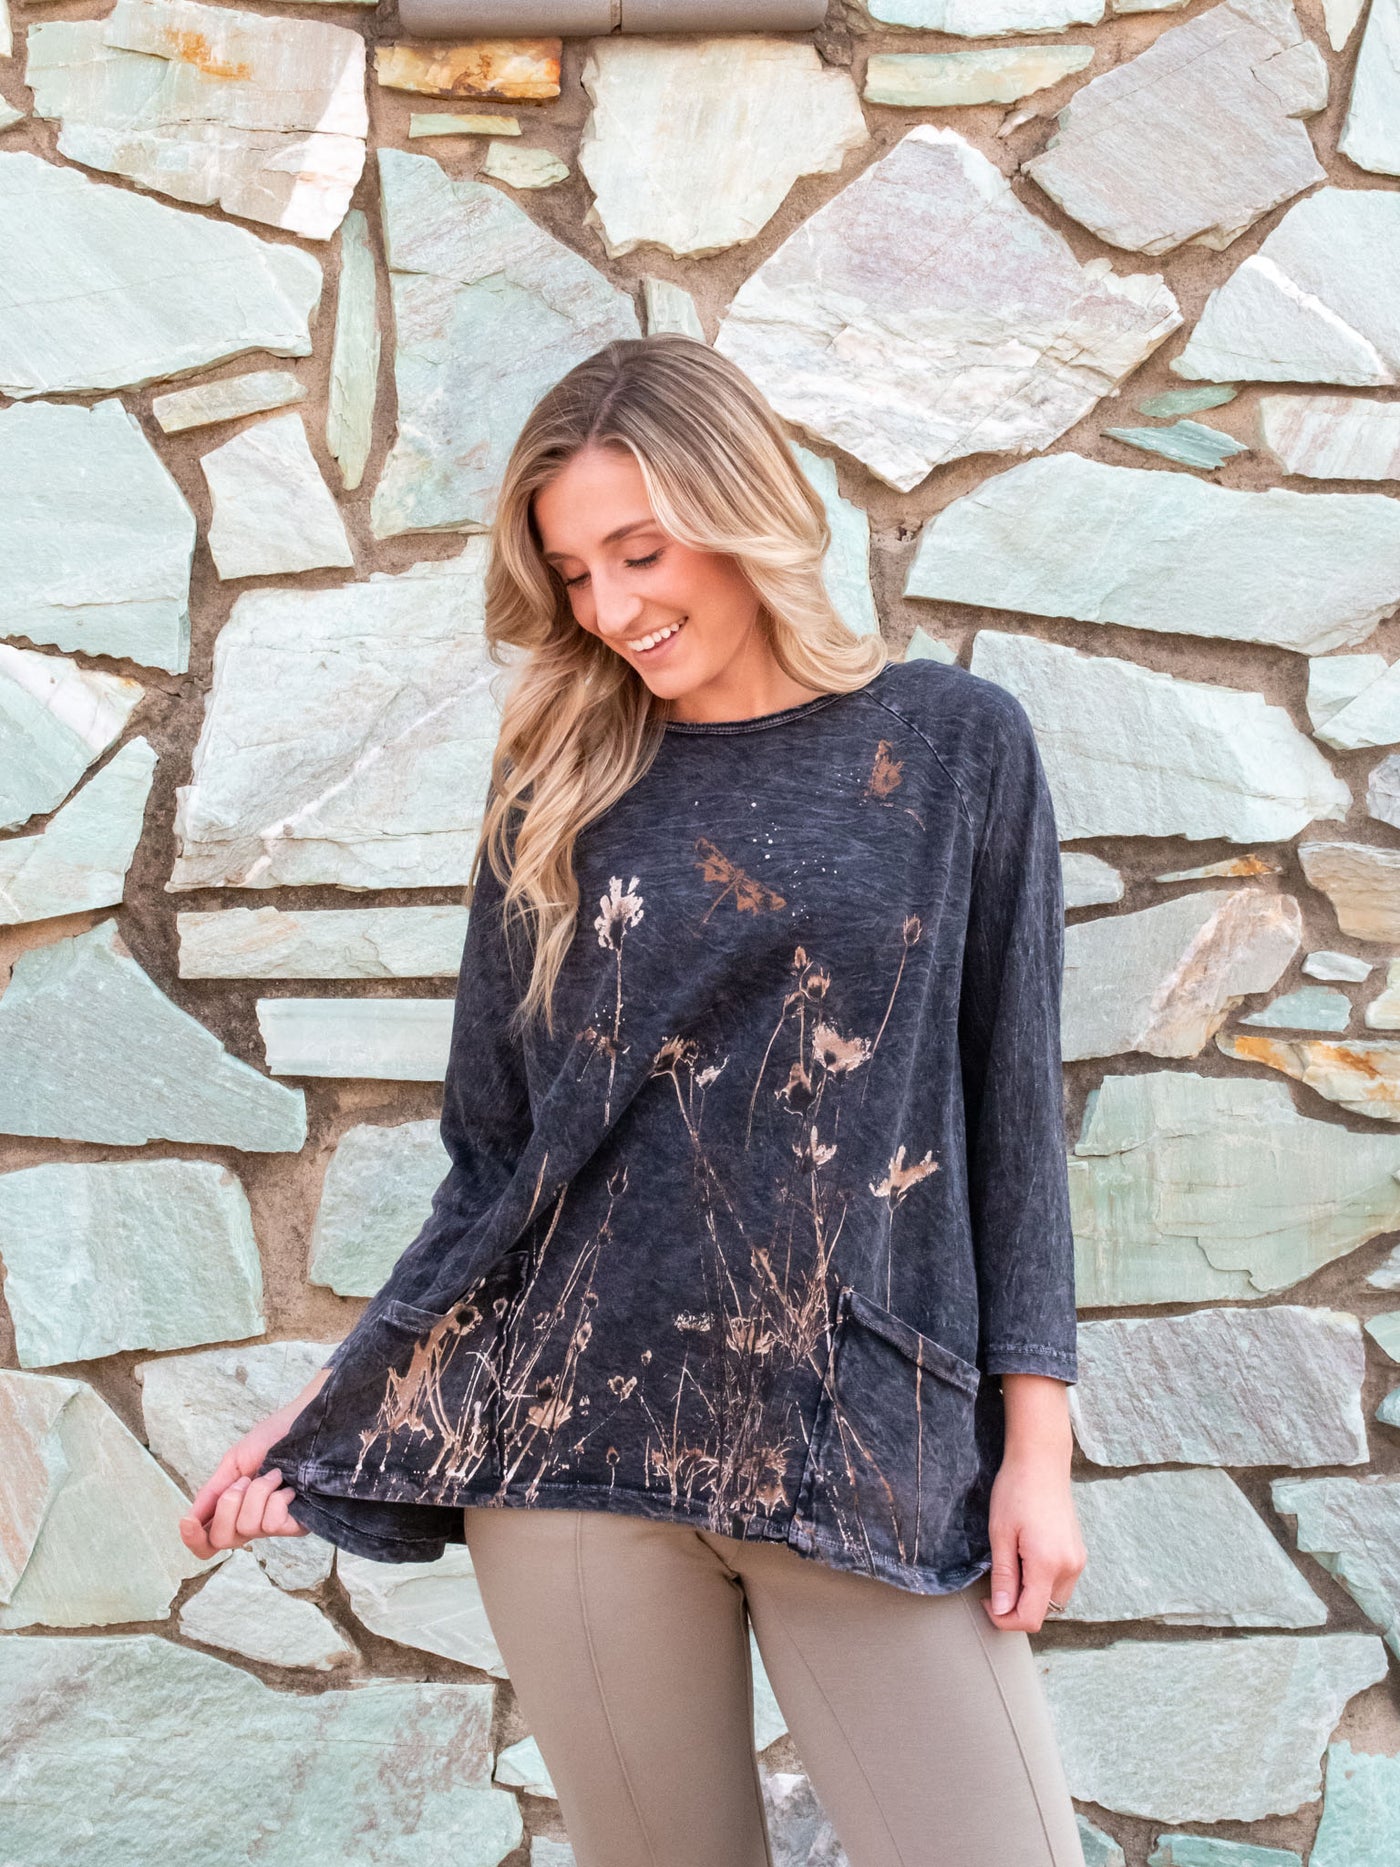 A model wearing a tunic style long sleeve top with a wildflower graphic on the front. The model has it paired with a tan pair of pants.